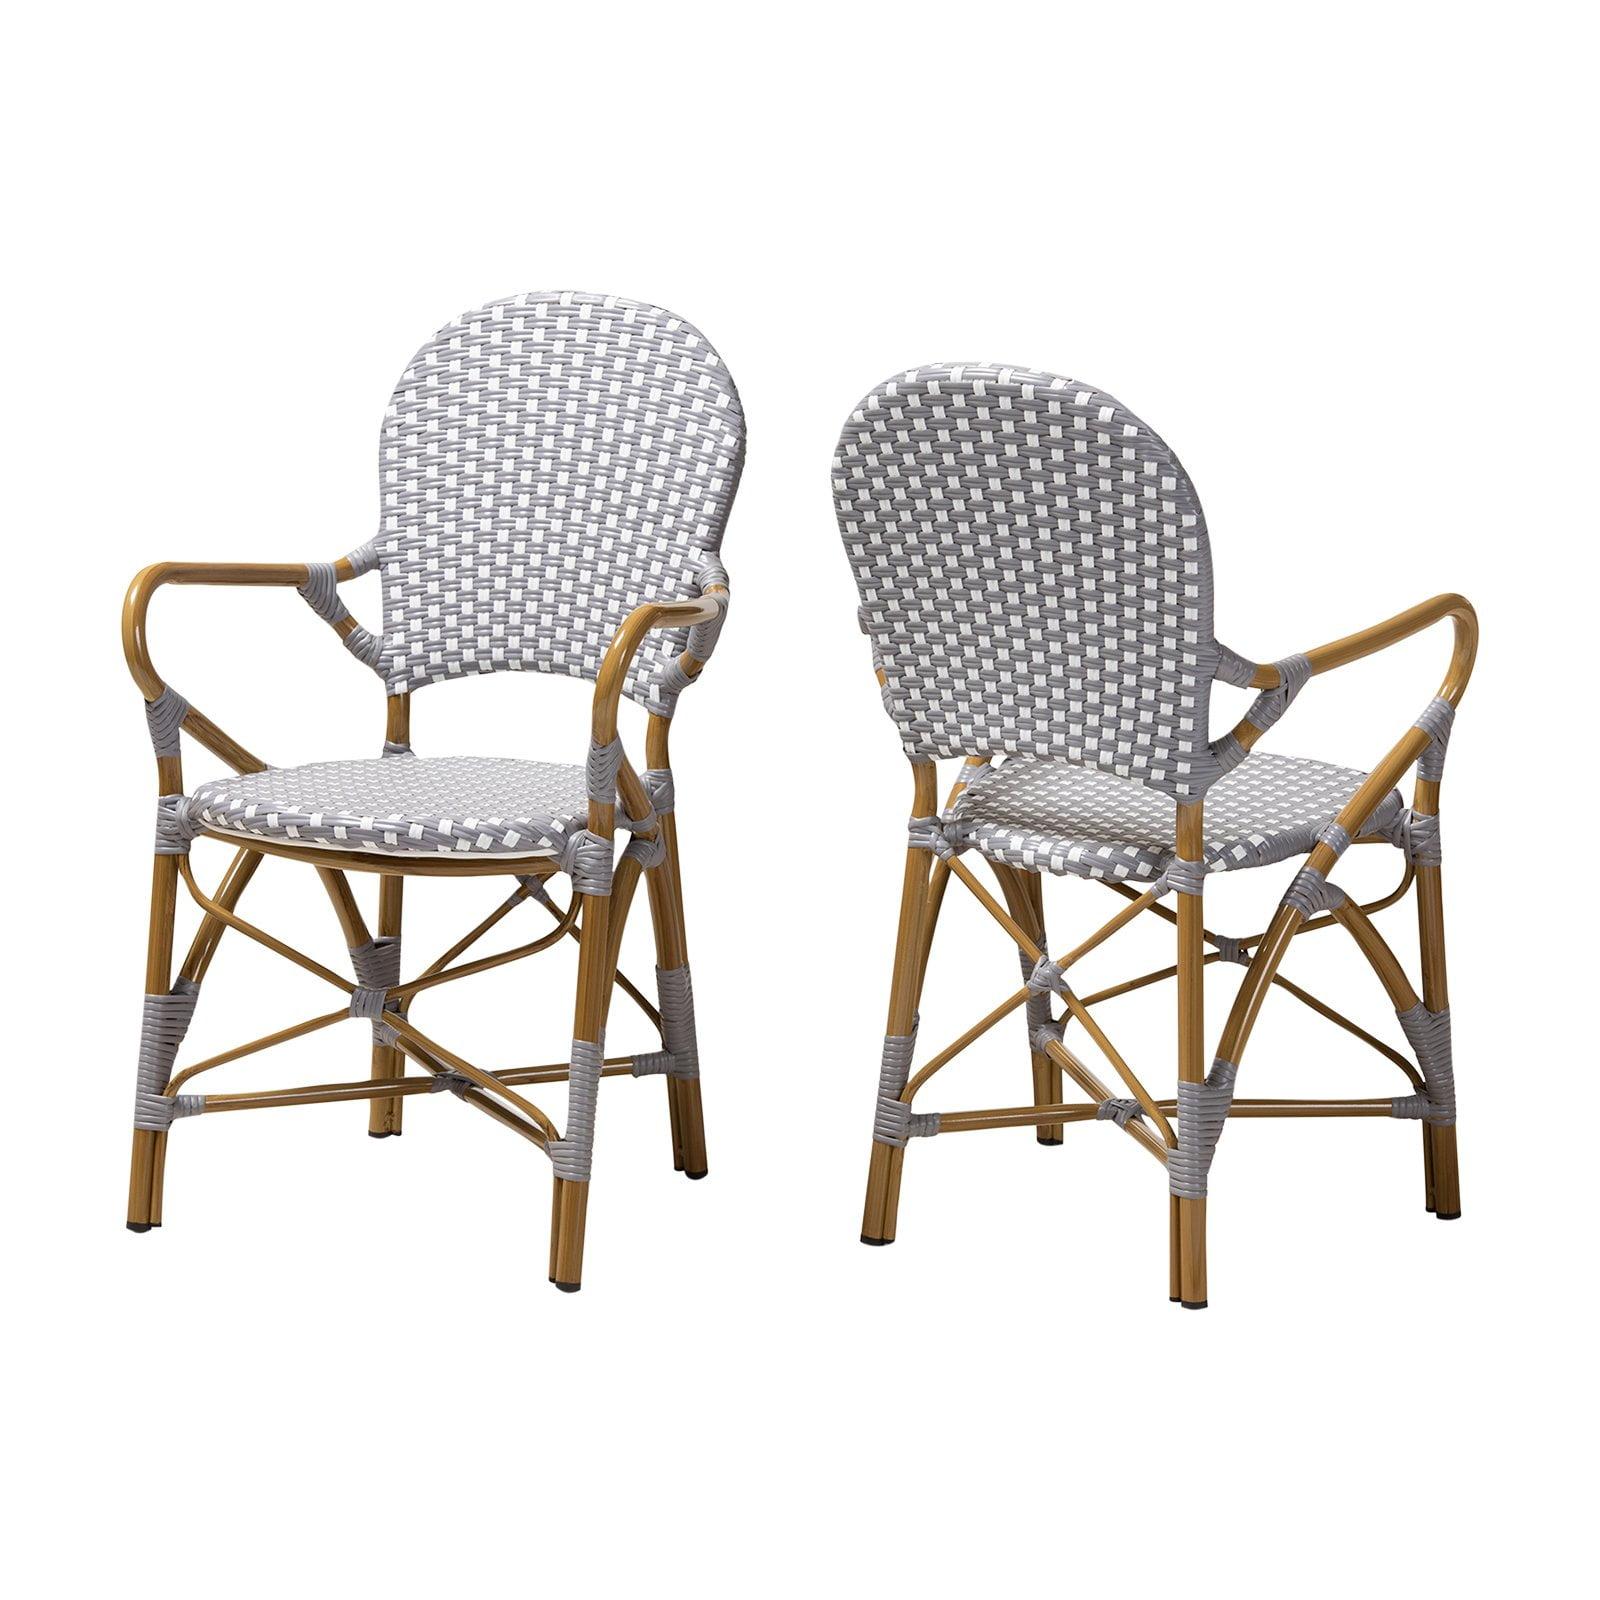 Seva Beige and Grey Bamboo-Style Aluminum Dining Chair